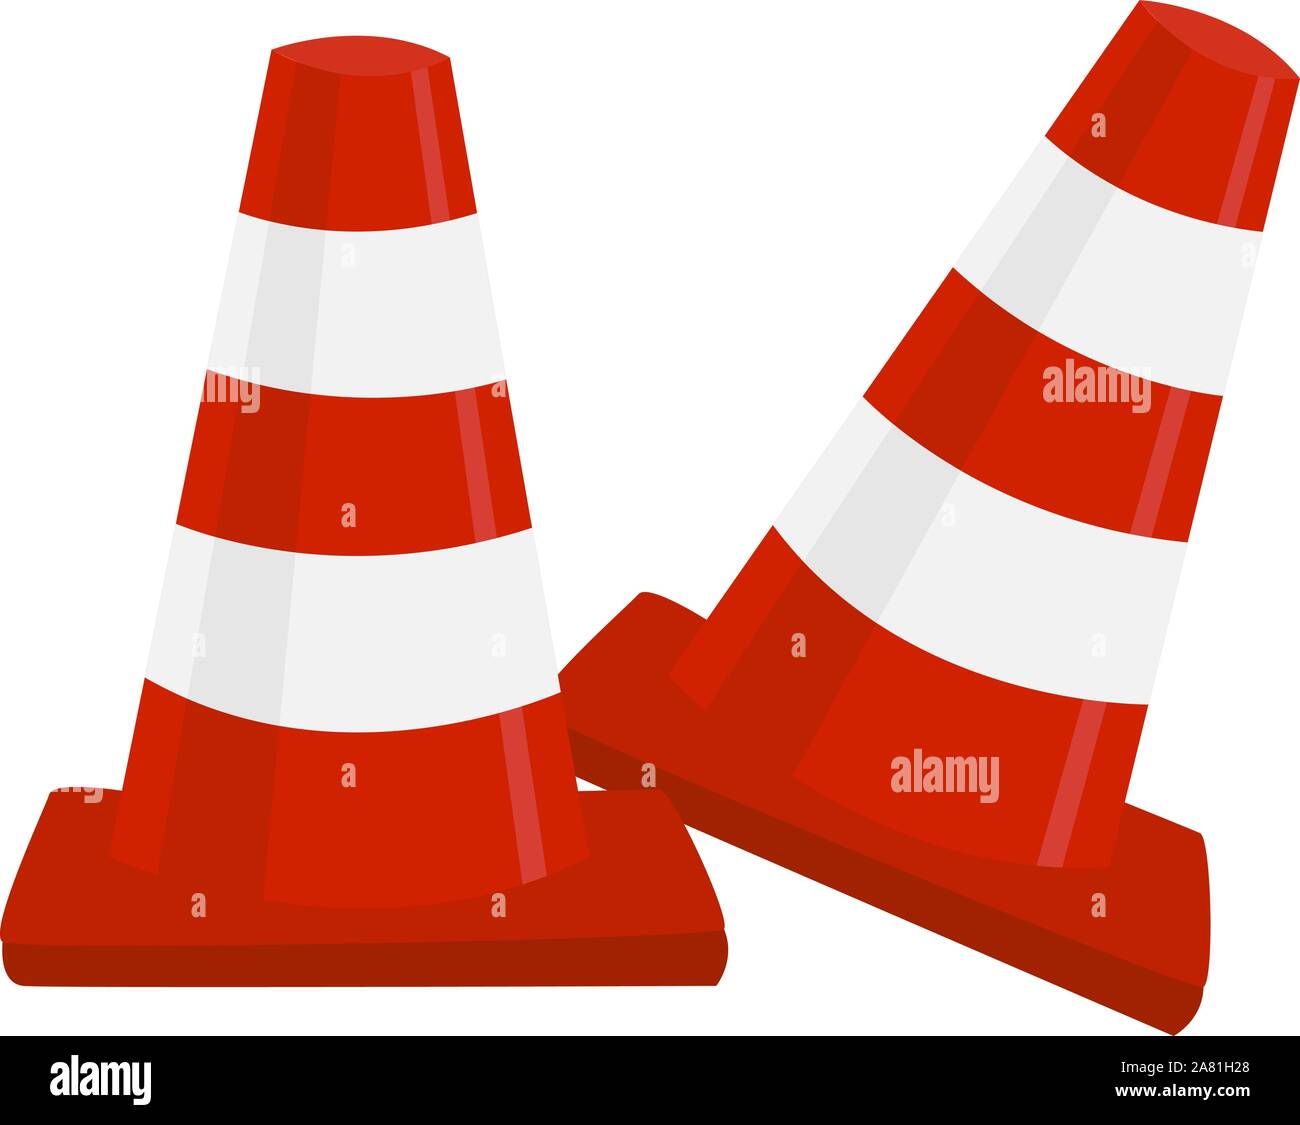 Traffic signal cone, illustration, vector on white background. Stock Vector